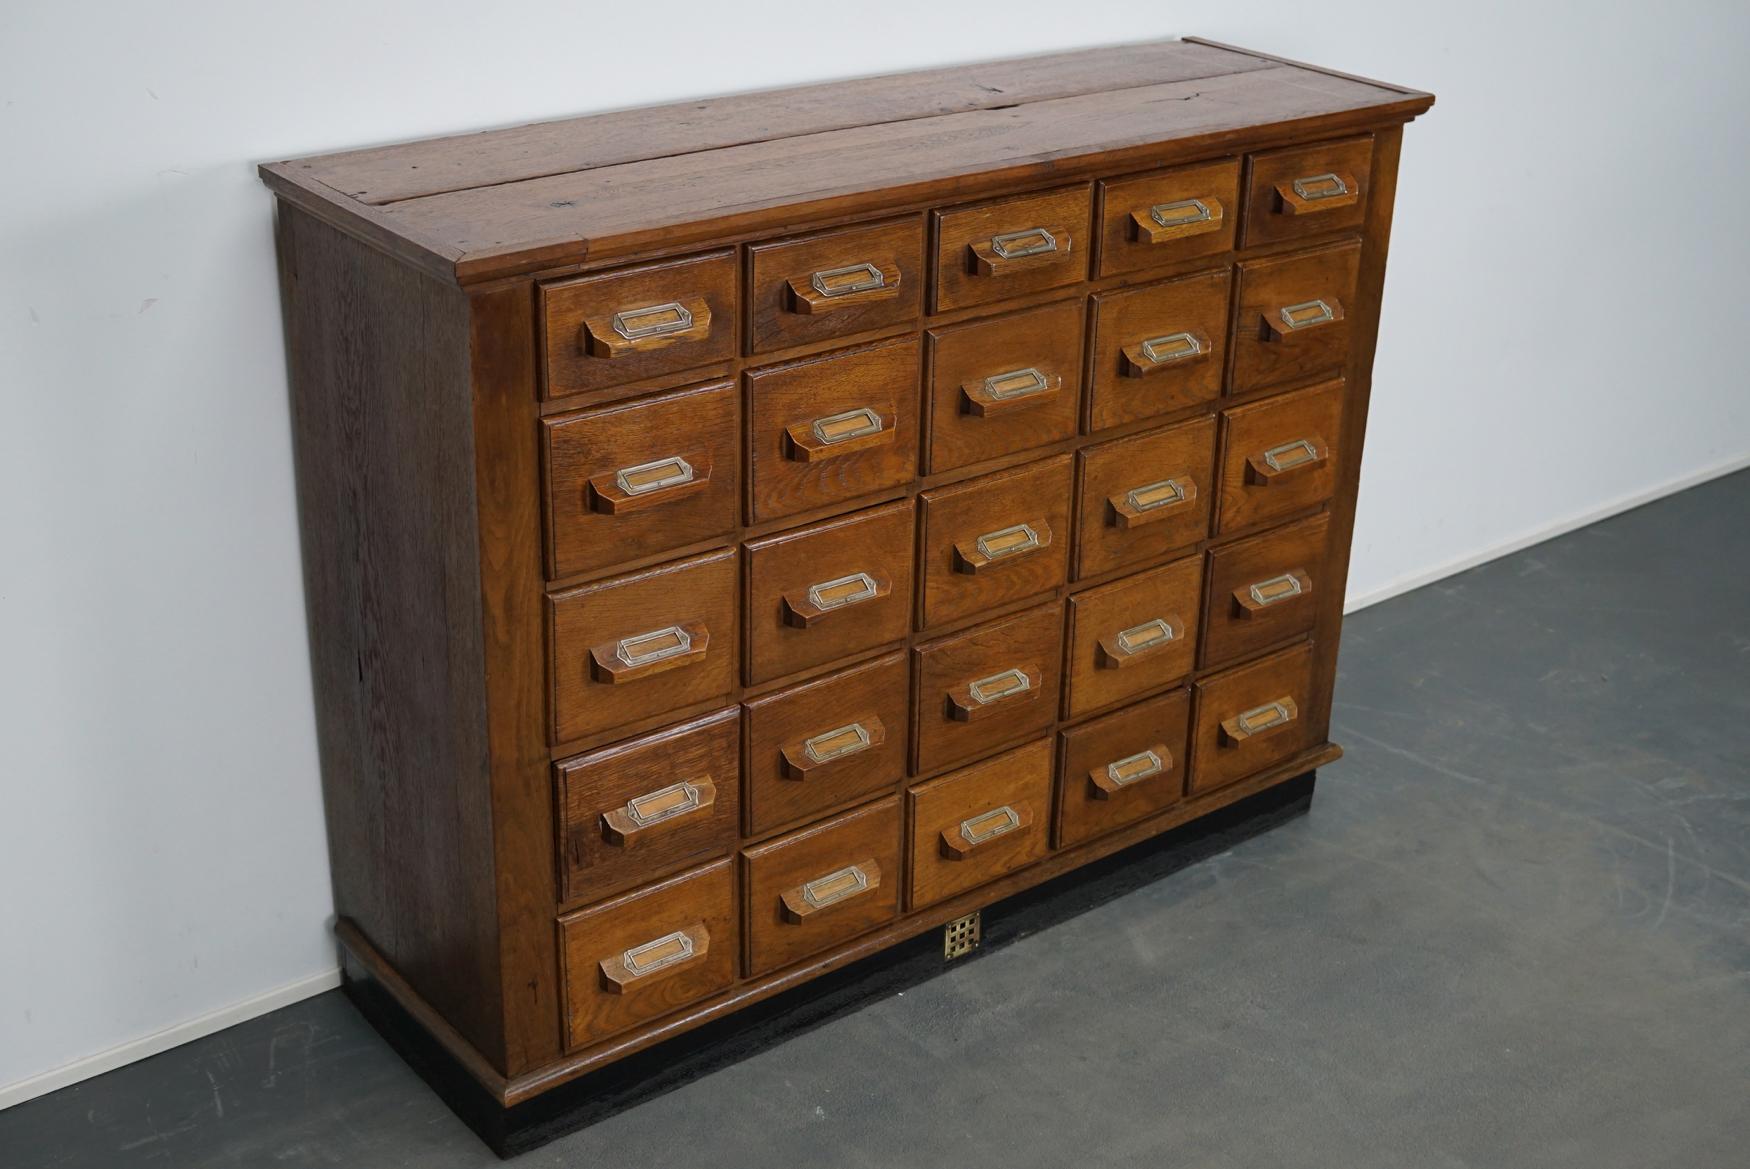 This apothecary cabinet was produced during the 1930s in Germany. This piece features 25 drawers with nice card holders and wooden pulls. The interior dimensions of the drawers are: D x W x H 33.5 x 17.5 x 13 cm and 8.5 cm for the top drawers. The